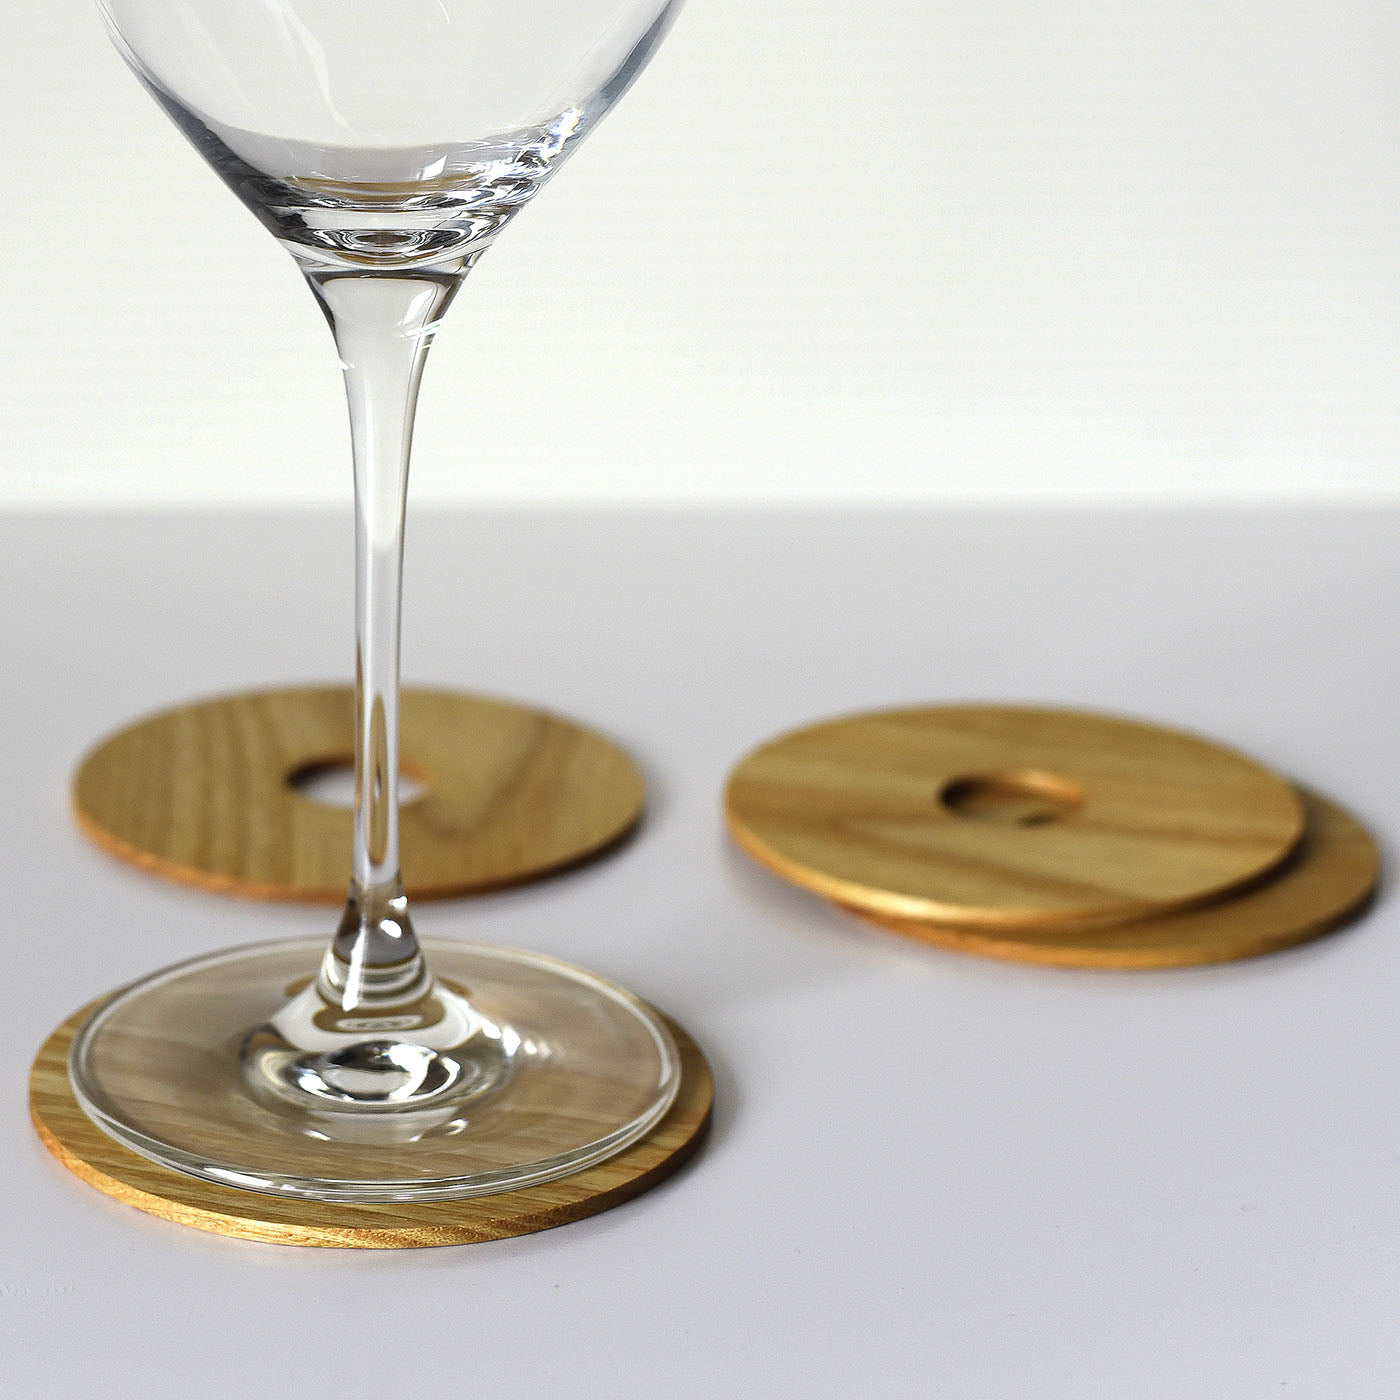 Set of 4 Wooden Coasters - Alternative view 4